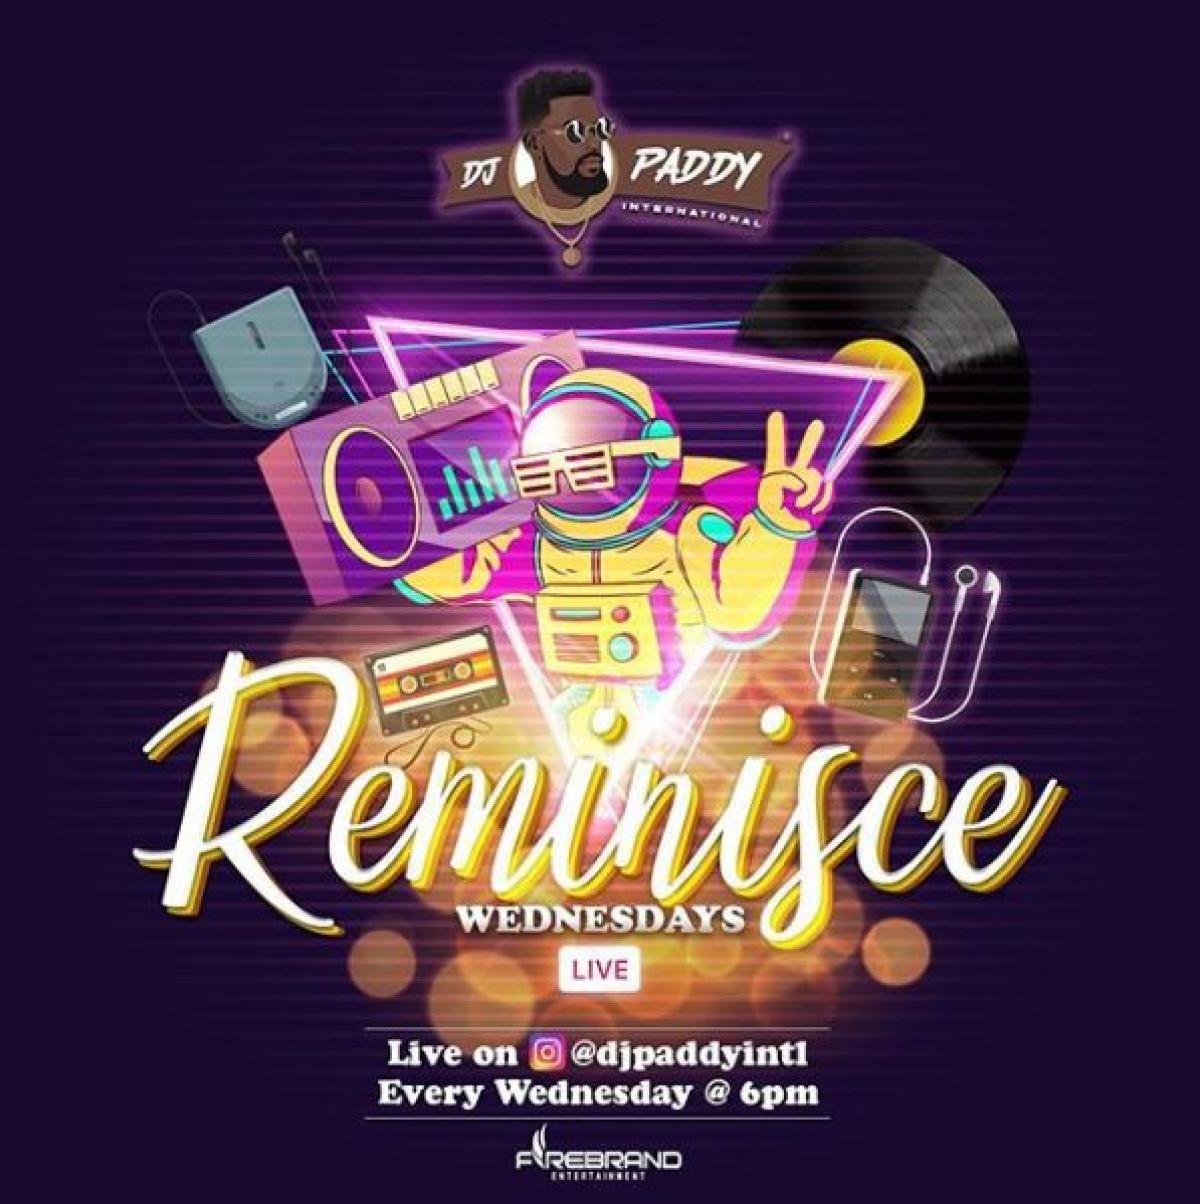 Reminisce Wednesdays  flyer or graphic.